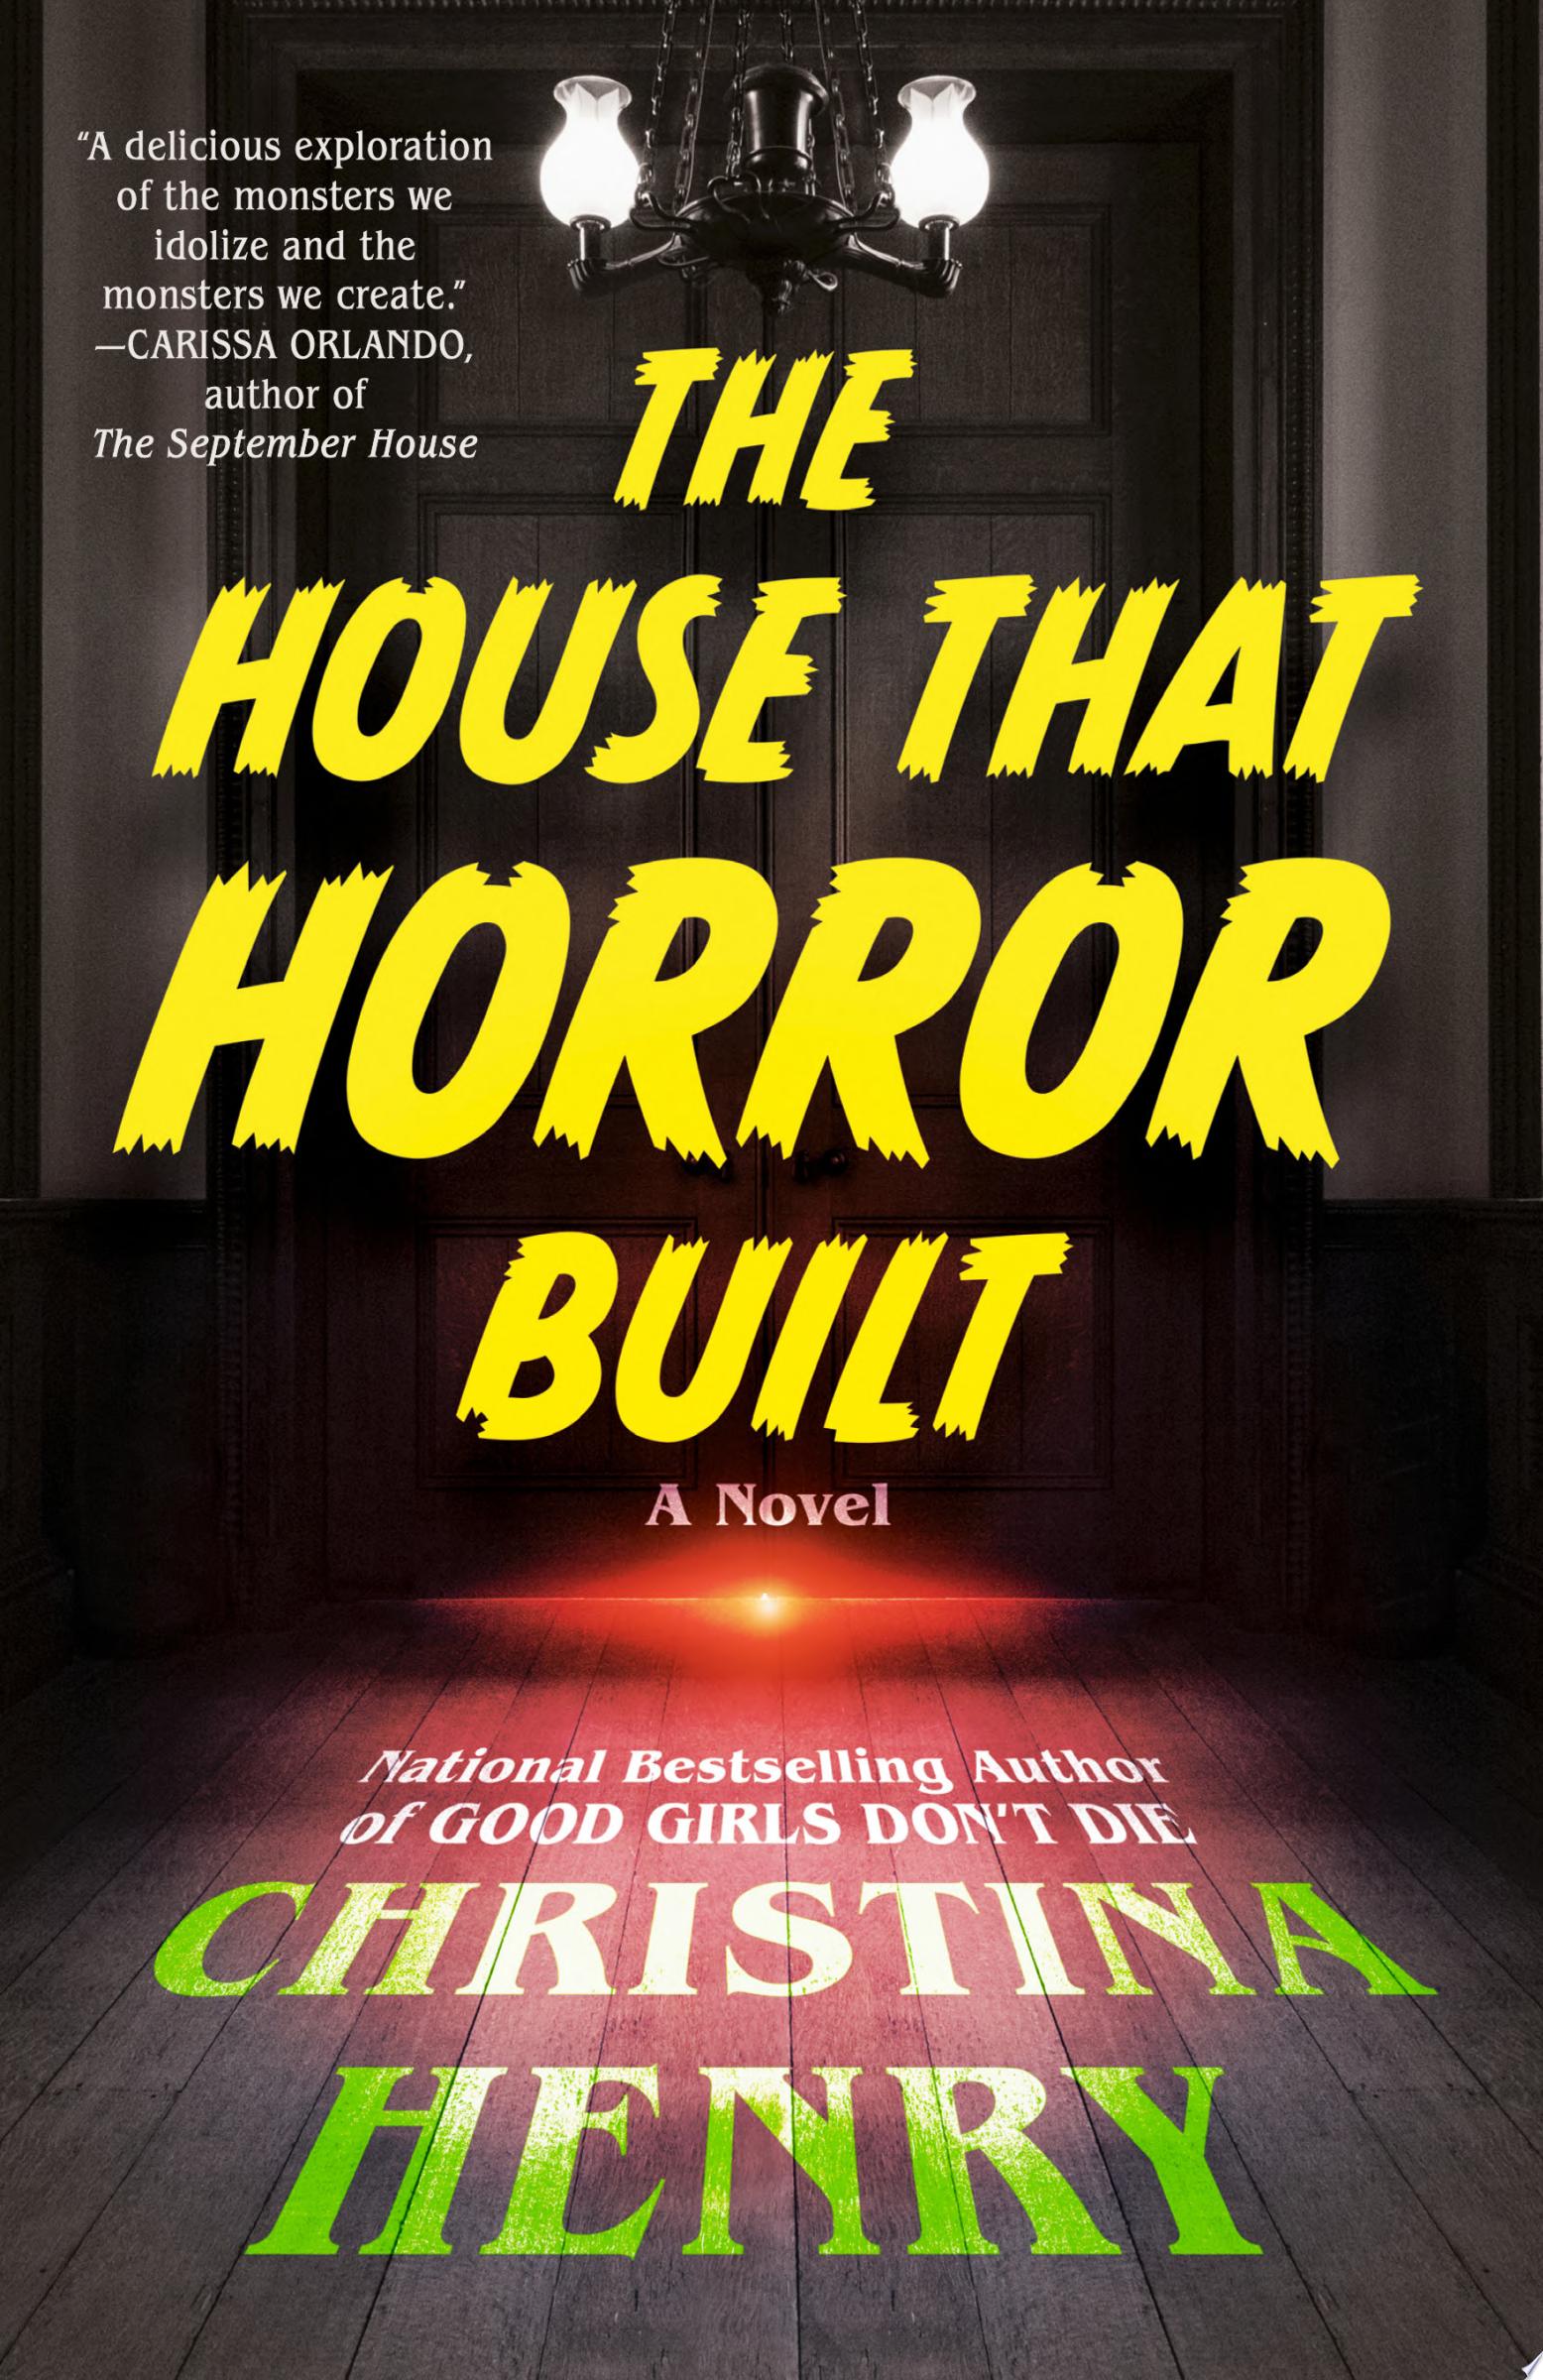 Image for "The House That Horror Built"